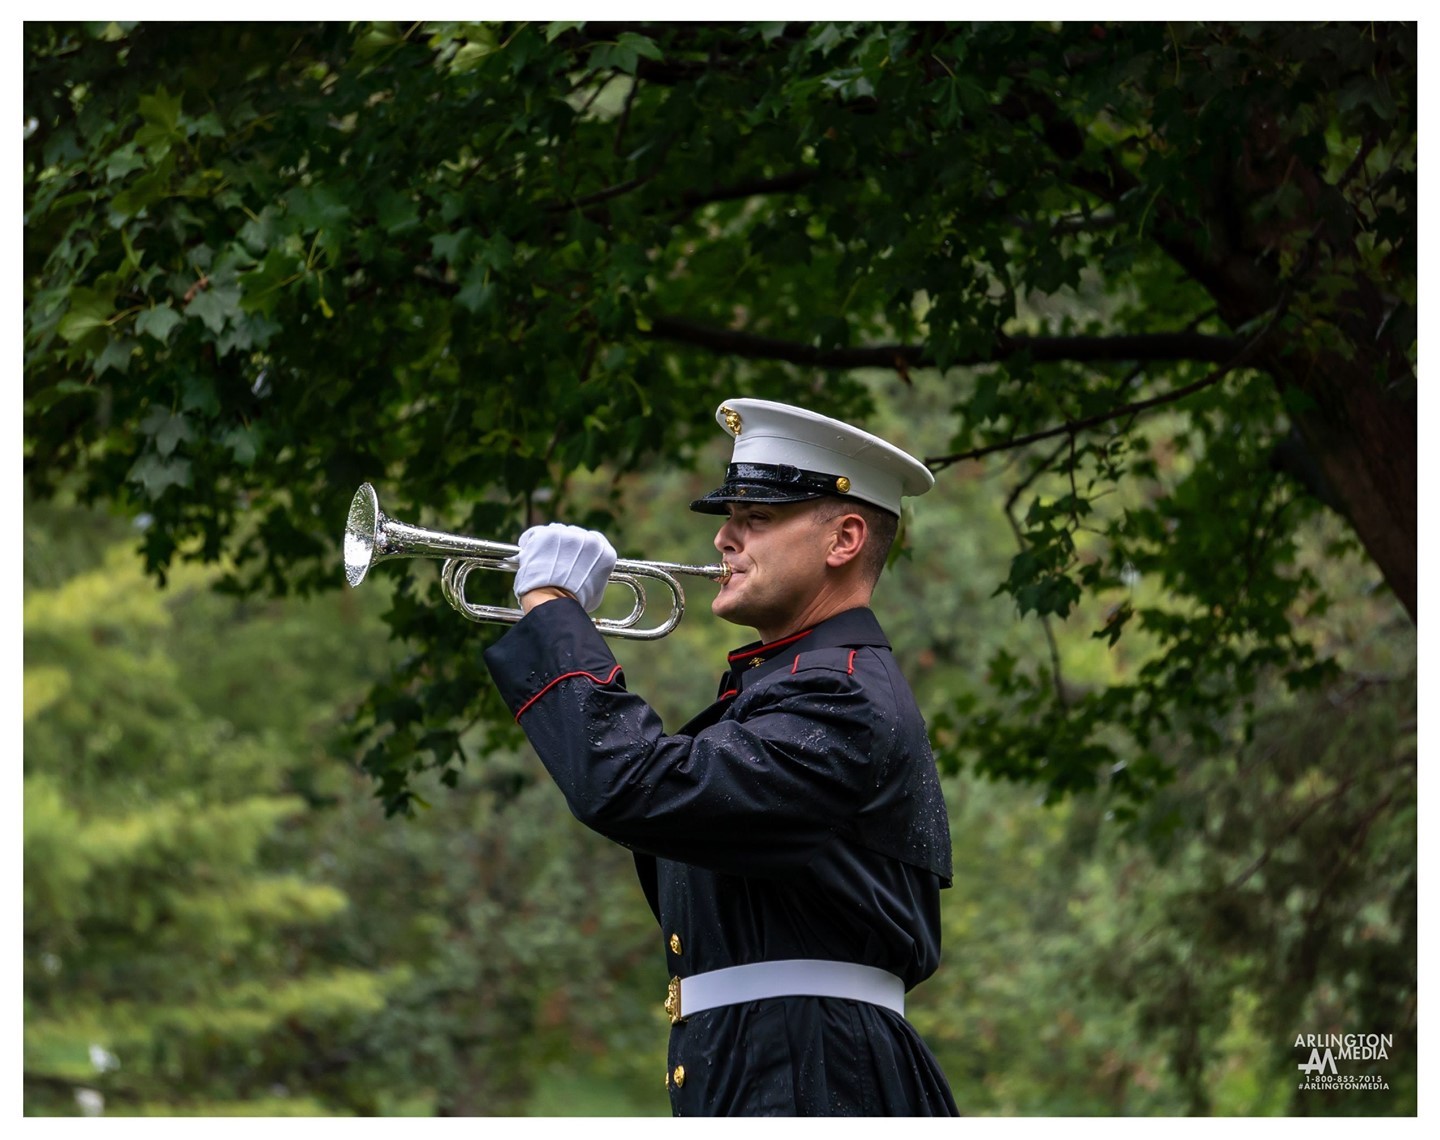 A US Marine bugler plays taps in a rainstorm last week as captured by the @arlingtonmedia team.

In the late 1800s, the Army formally adopted the tune for use at military funerals and memorial services. Today, the 24 mournful notes comprising “Taps” are played to commemorate the memory of members of all five branches of the armed forces: the Army, the Navy, the Marine Corps, the Air Force, and the Coast Guard.